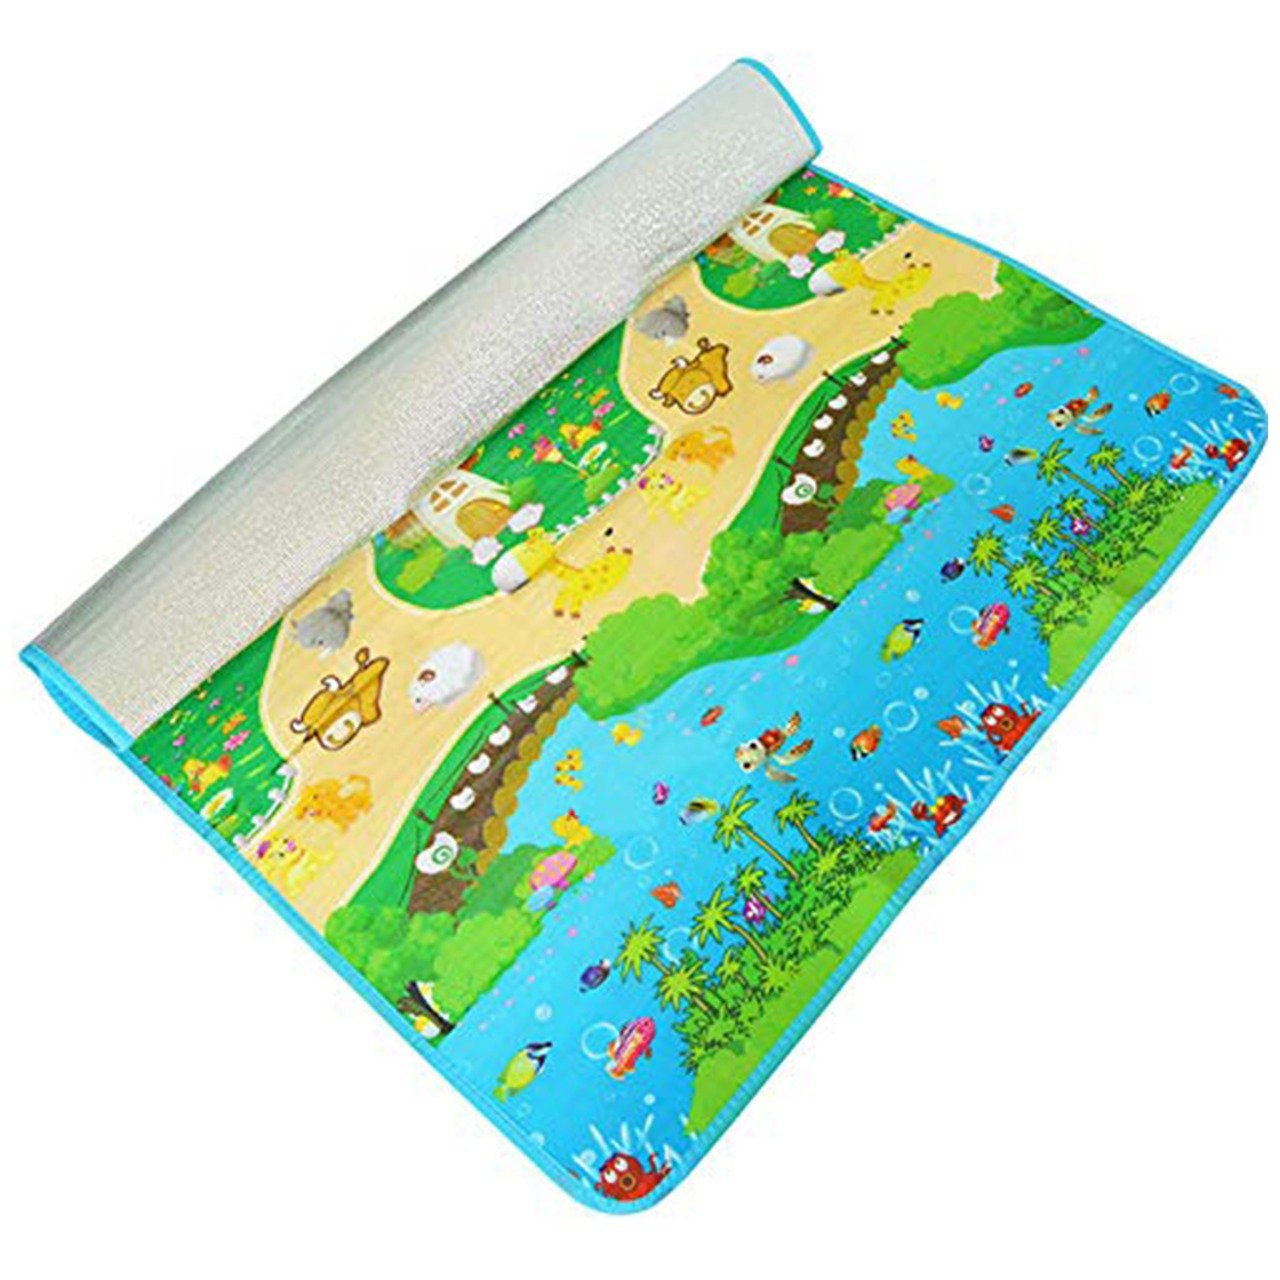 Waterproof Baby Play Crawl Floor Mat for Kids Picnic Home (Size 180 x 115)